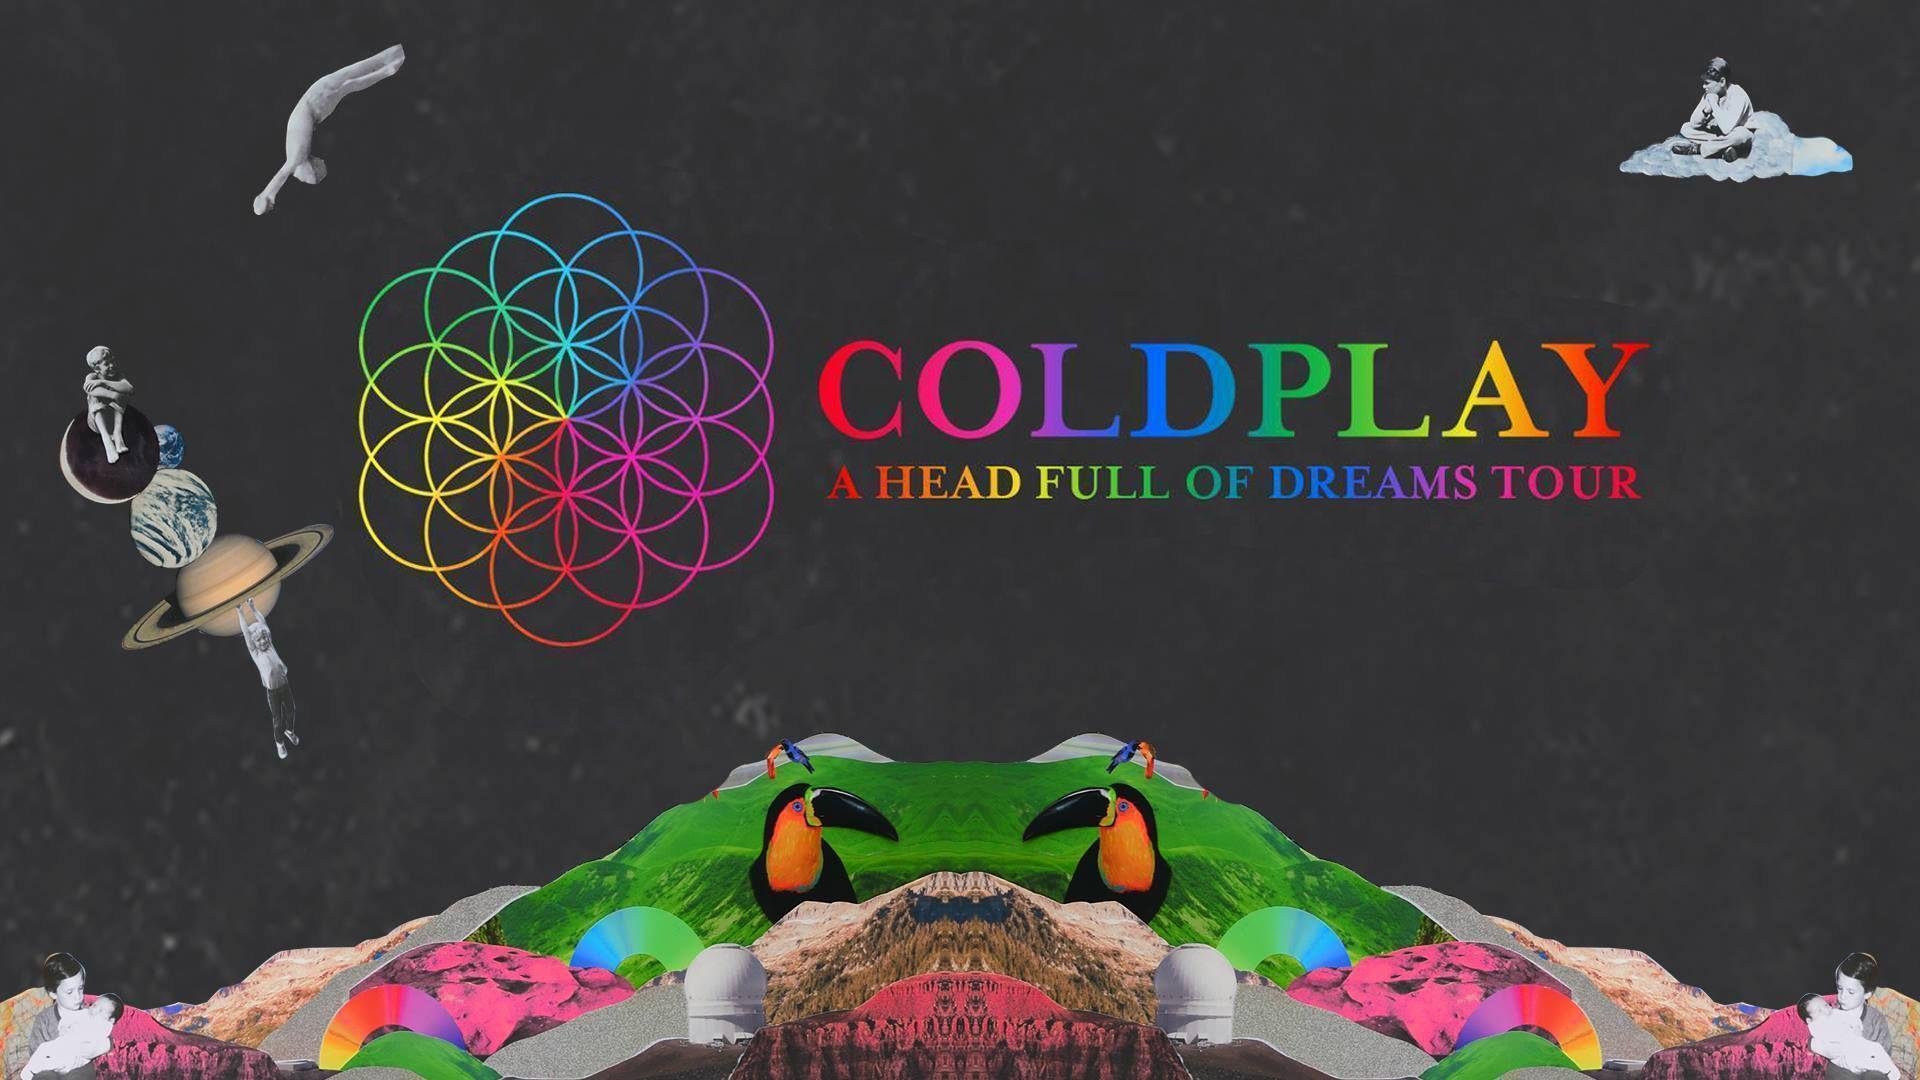 COLDPLAY MANILA 2017: MOA Concert Grounds Ticket Details